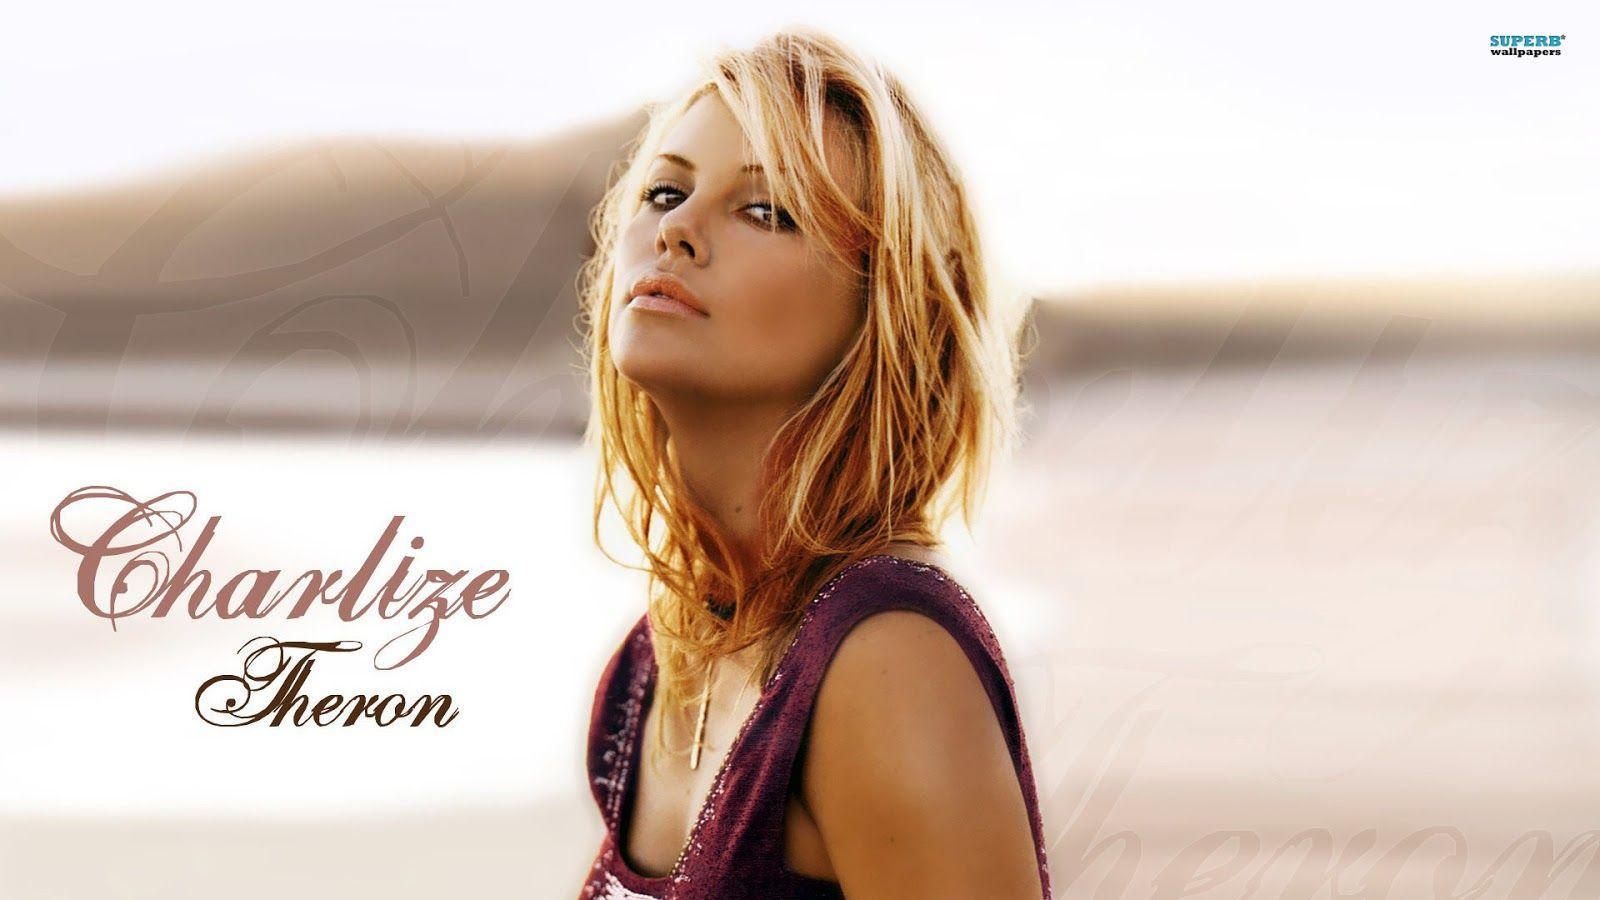 Charlize Theron Wallpaper Charlize Theron Hot Wallpaper Charlize